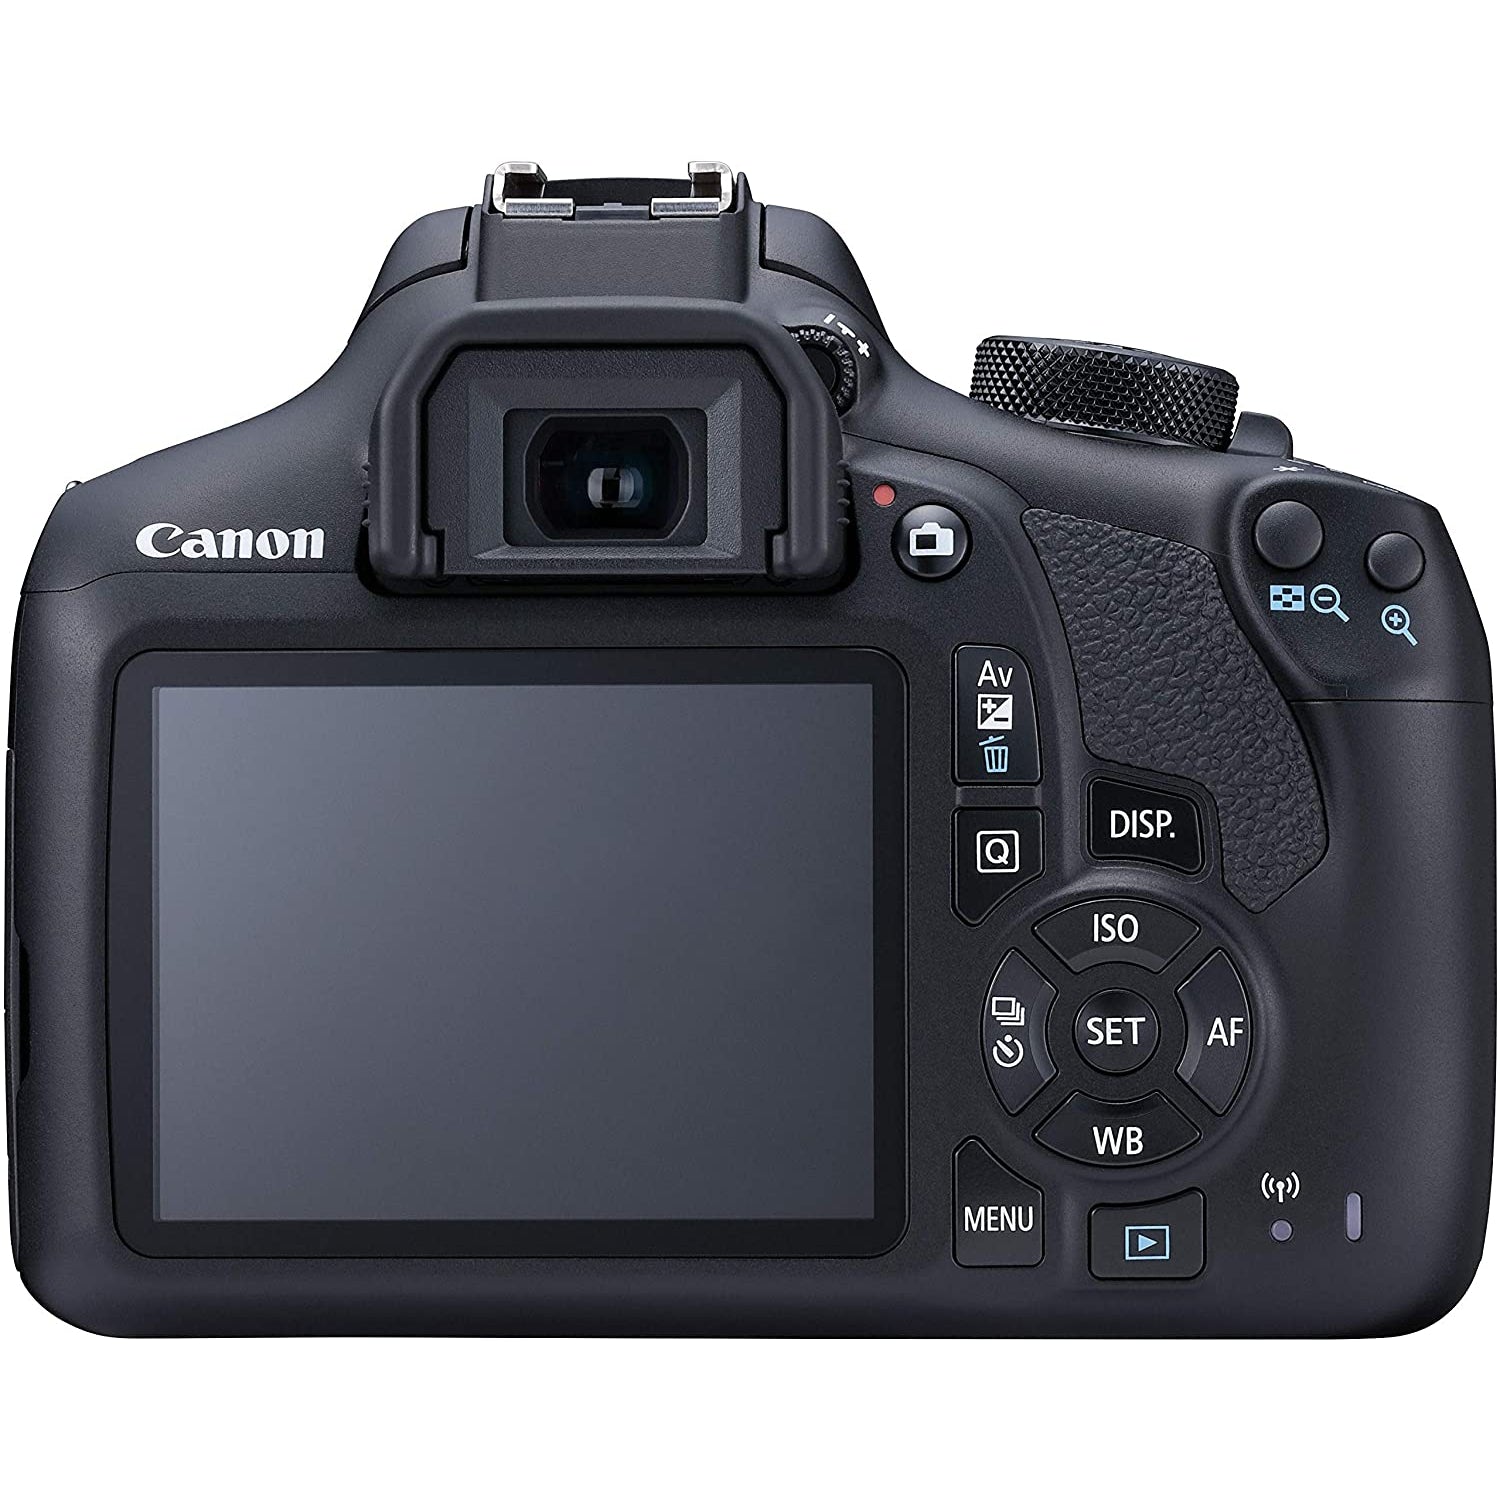 Canon EOS 1300D 18MP Digital SLR Camera (Black) with 18-55mm ISII Lens